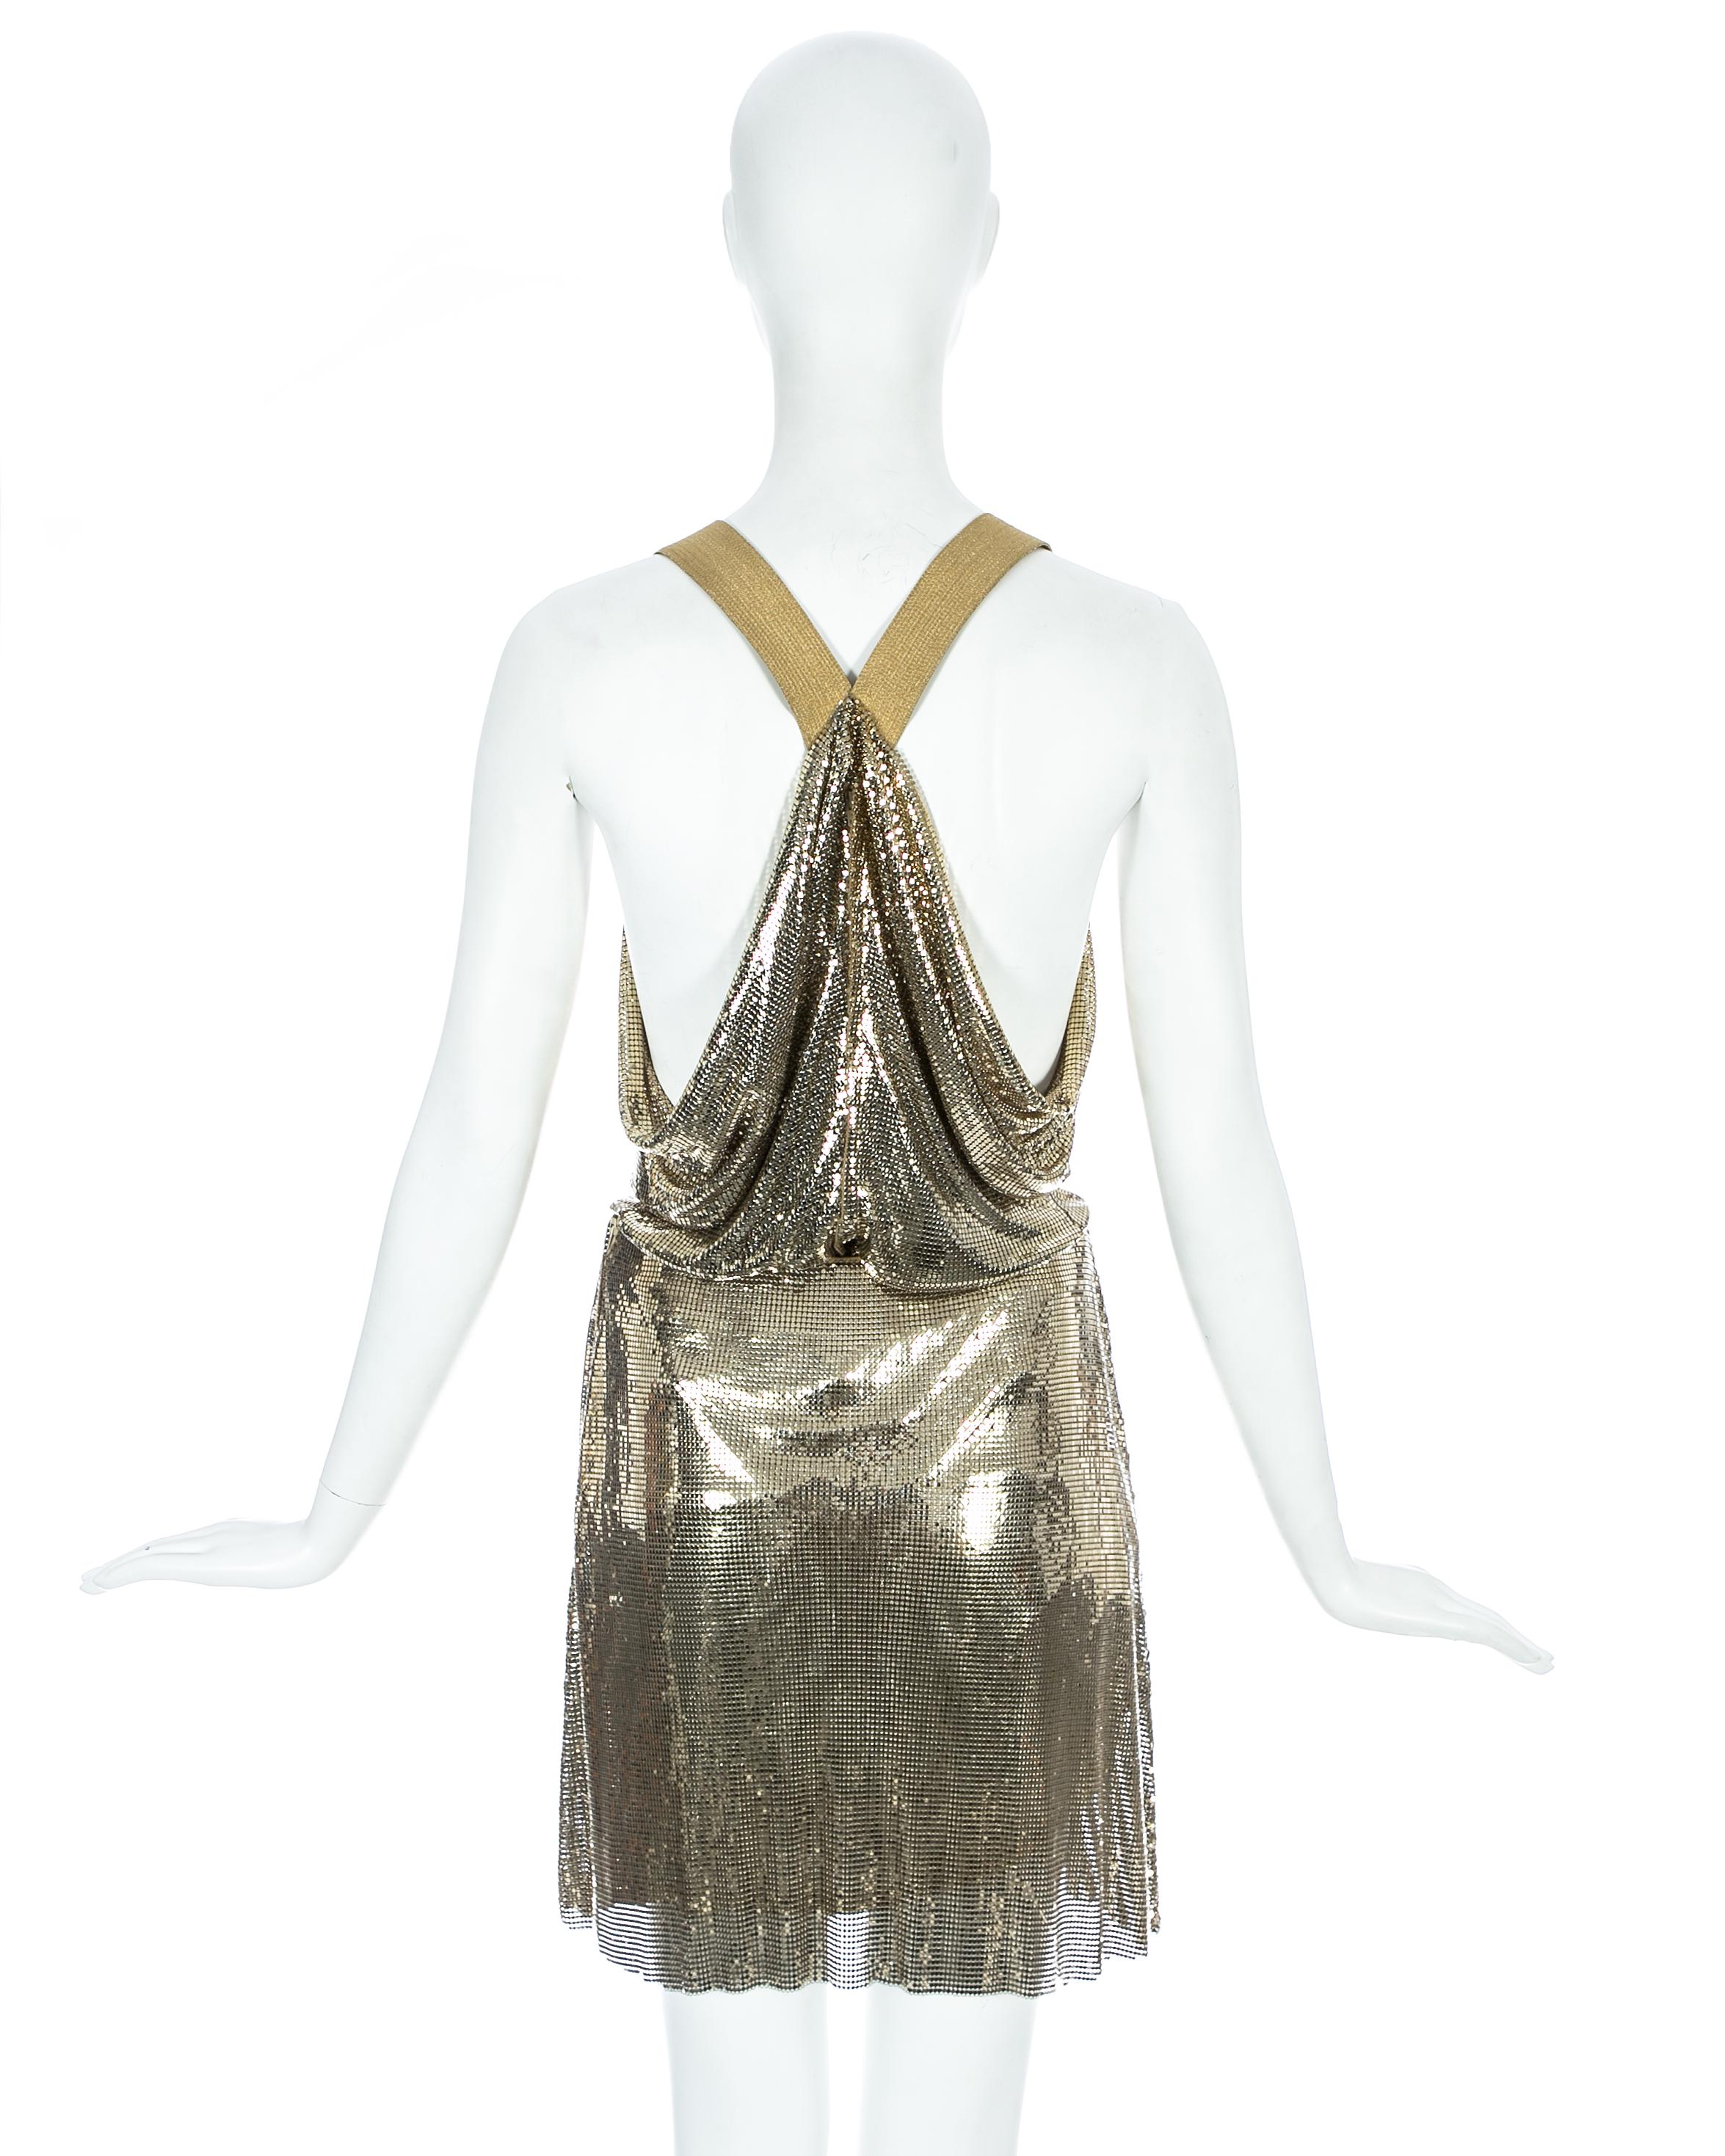 Gianni Versace gold metal mesh chainmail evening dress, fw 1994 1